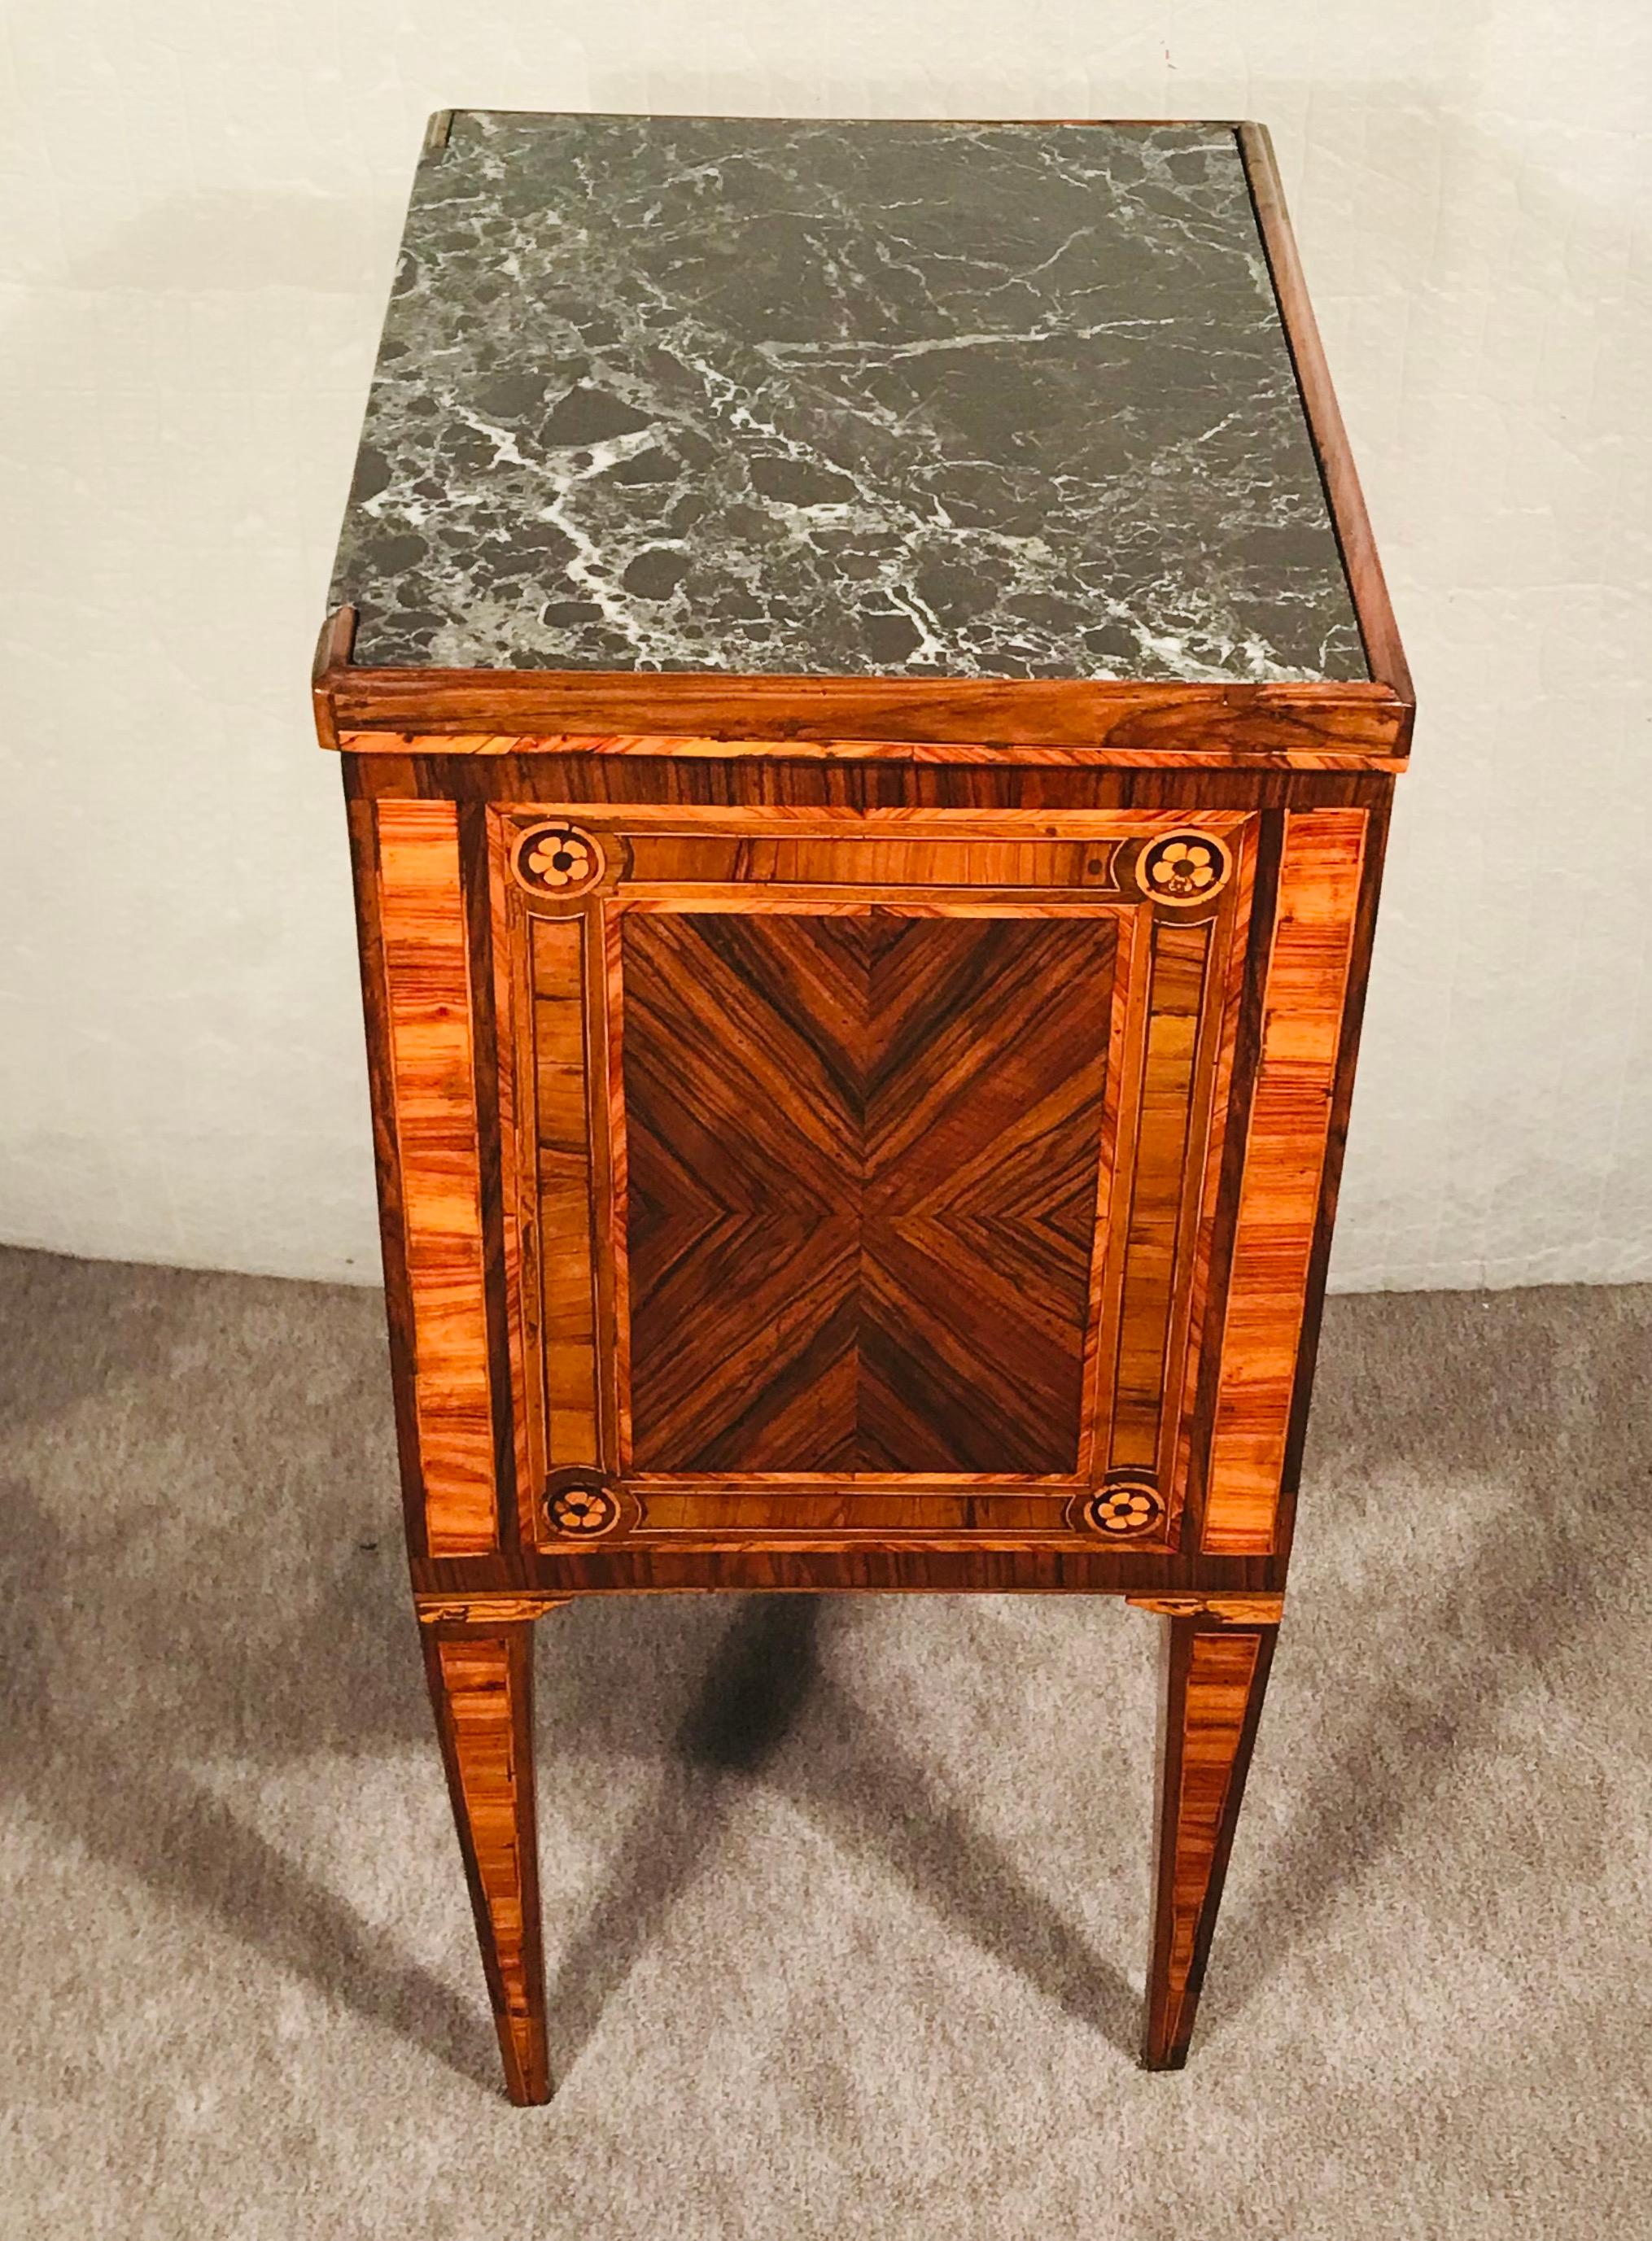 Discover the timeless charm of our Antique French Louis XVI Nightstand, meticulously crafted in 1780. This rare and beautiful piece stands gracefully on four tapering legs, showcasing exceptional marquetry and walnut veneer craftsmanship.

The